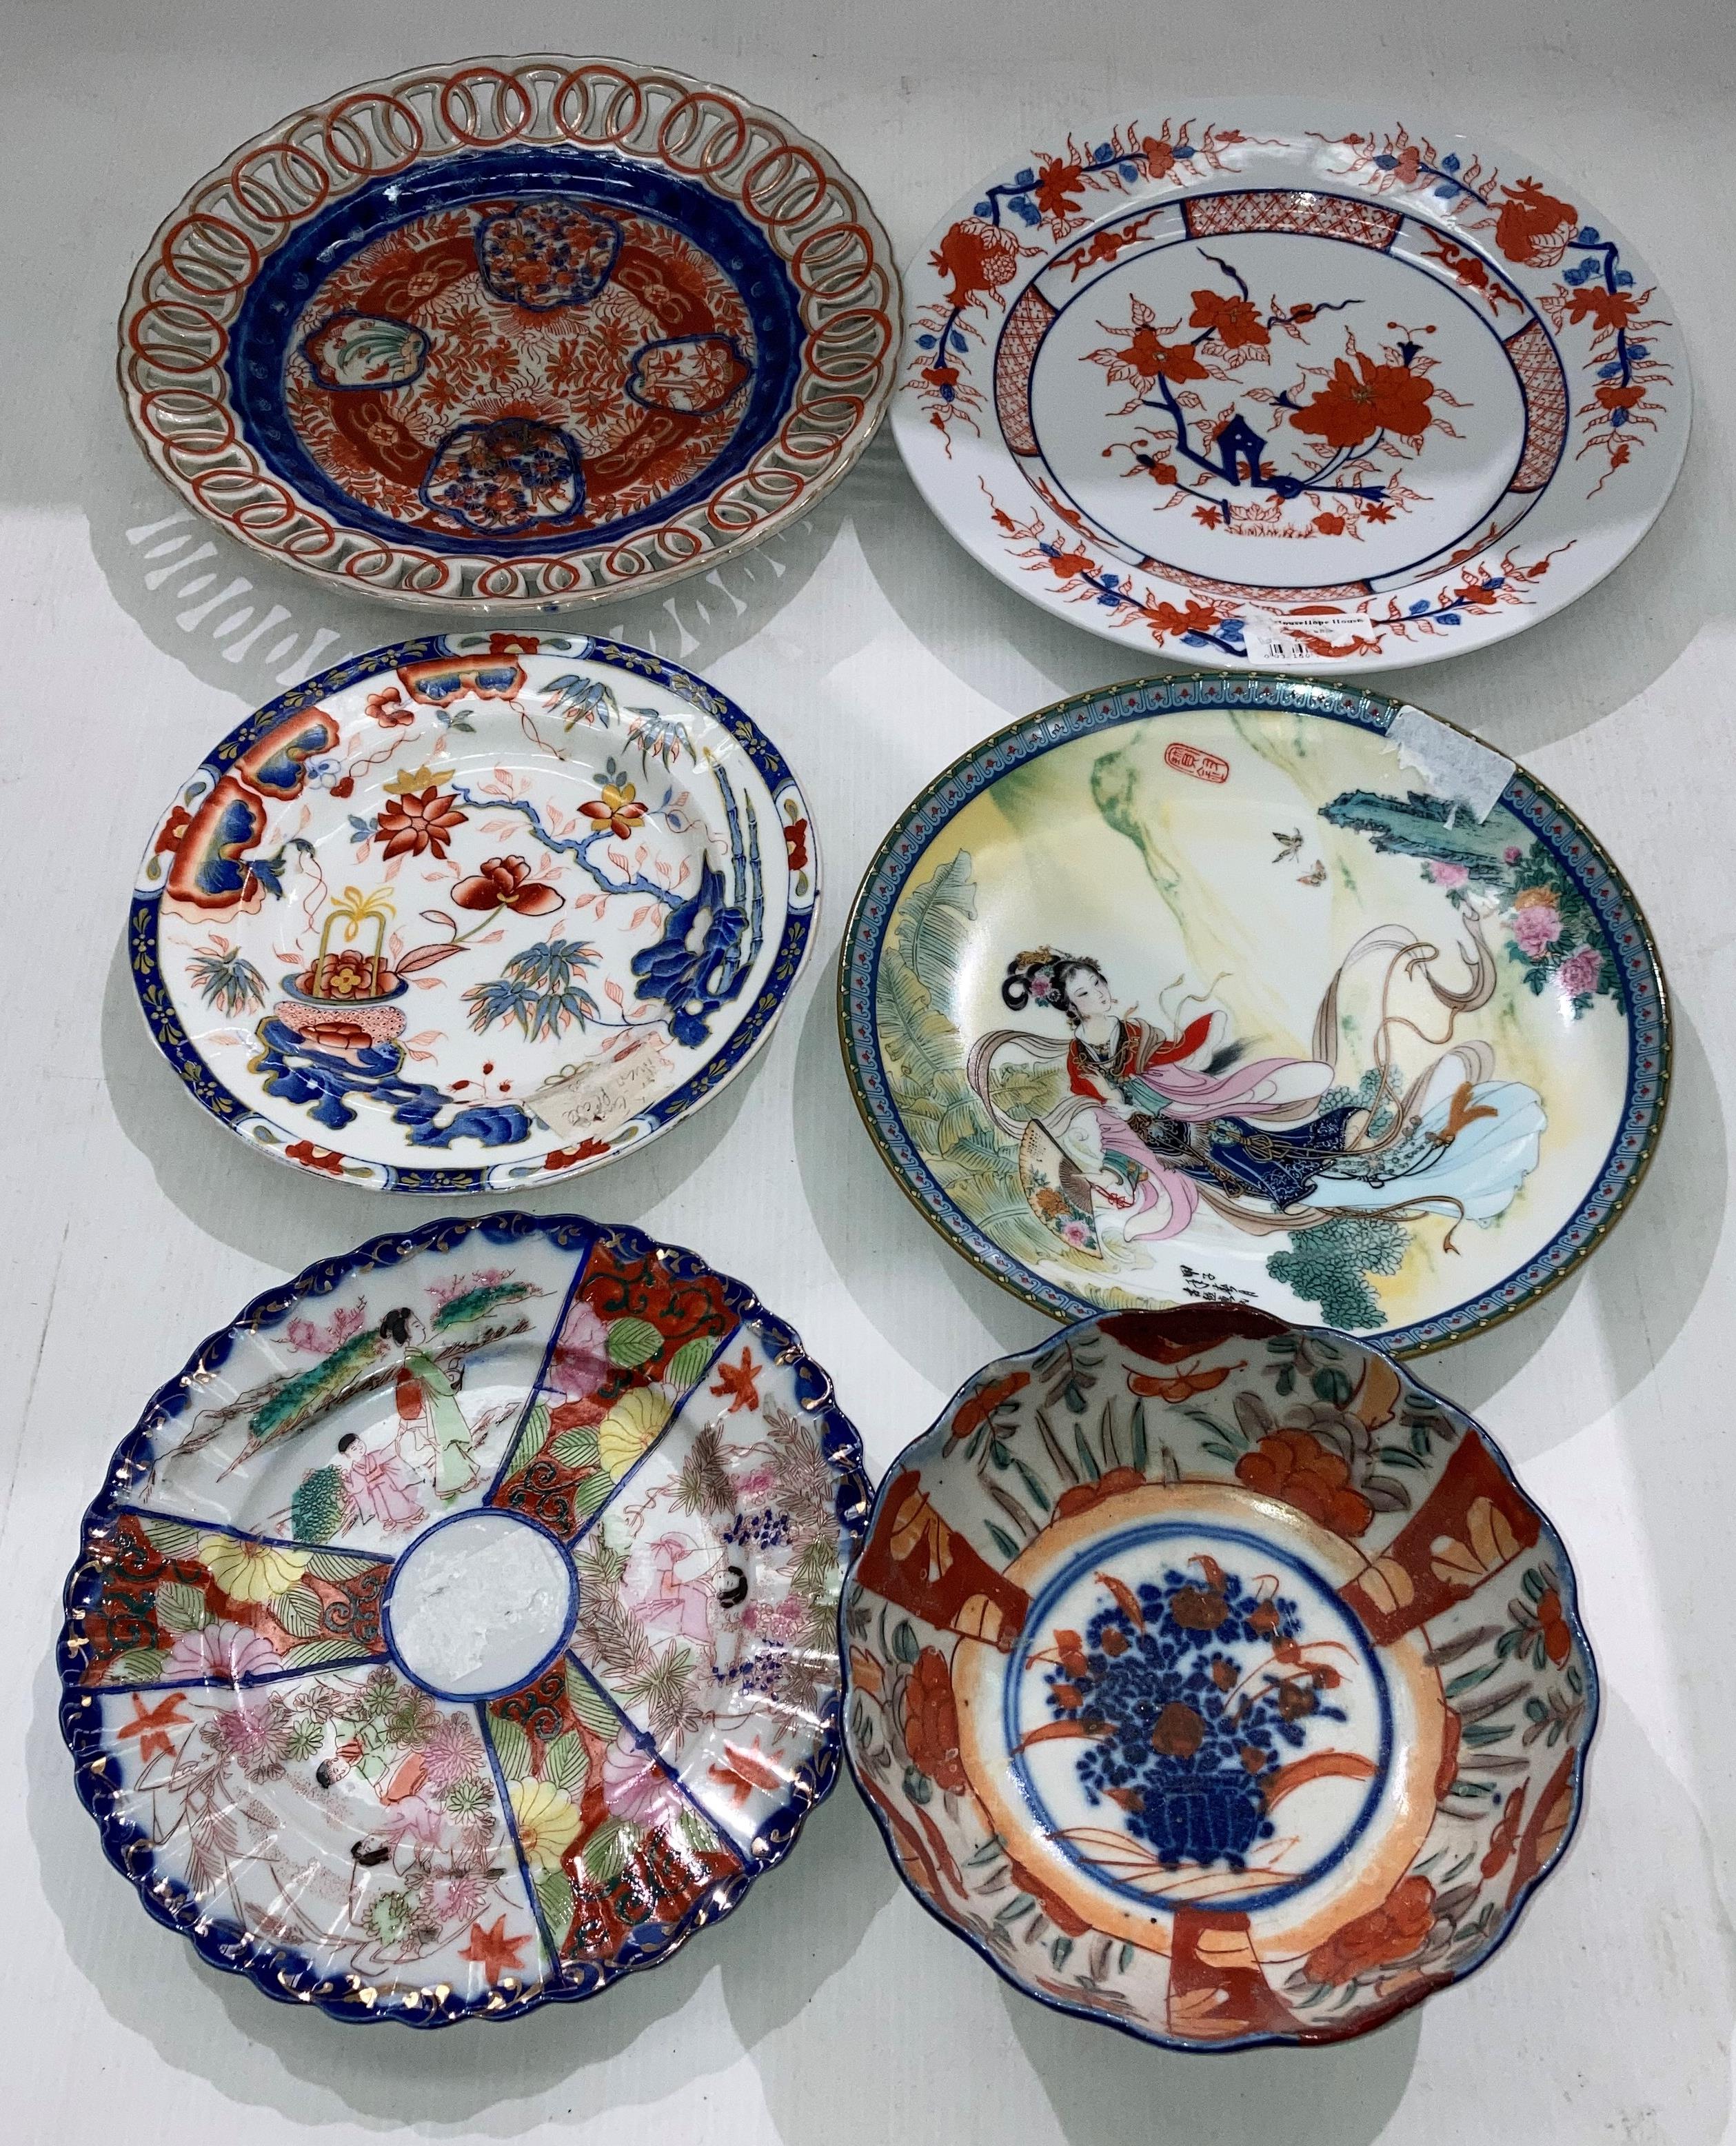 Six assorted Oriental plates and bowl including a Limited Edition 1986 Royal Jingdezhen porcelain